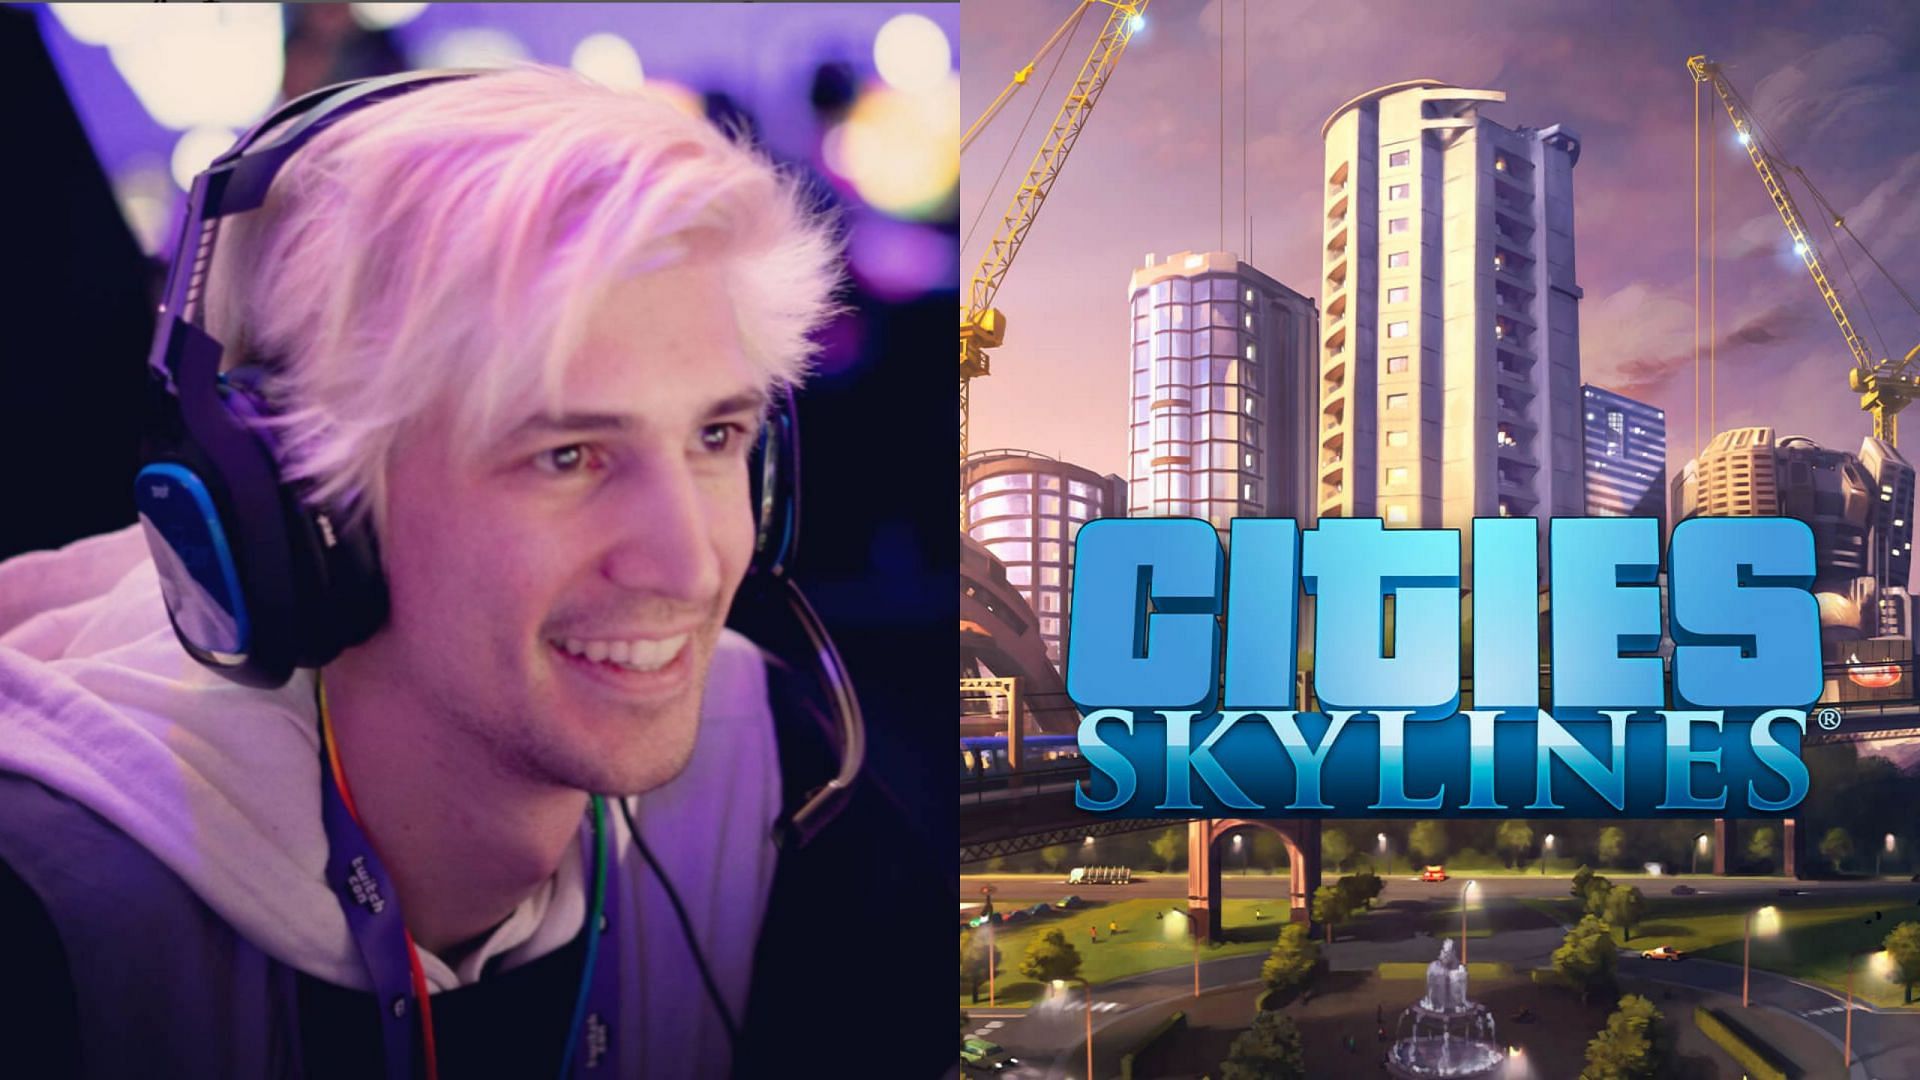 xQc hilariously his college in Cities: Skylines (Images via Instagram/xqcow1 and Google)